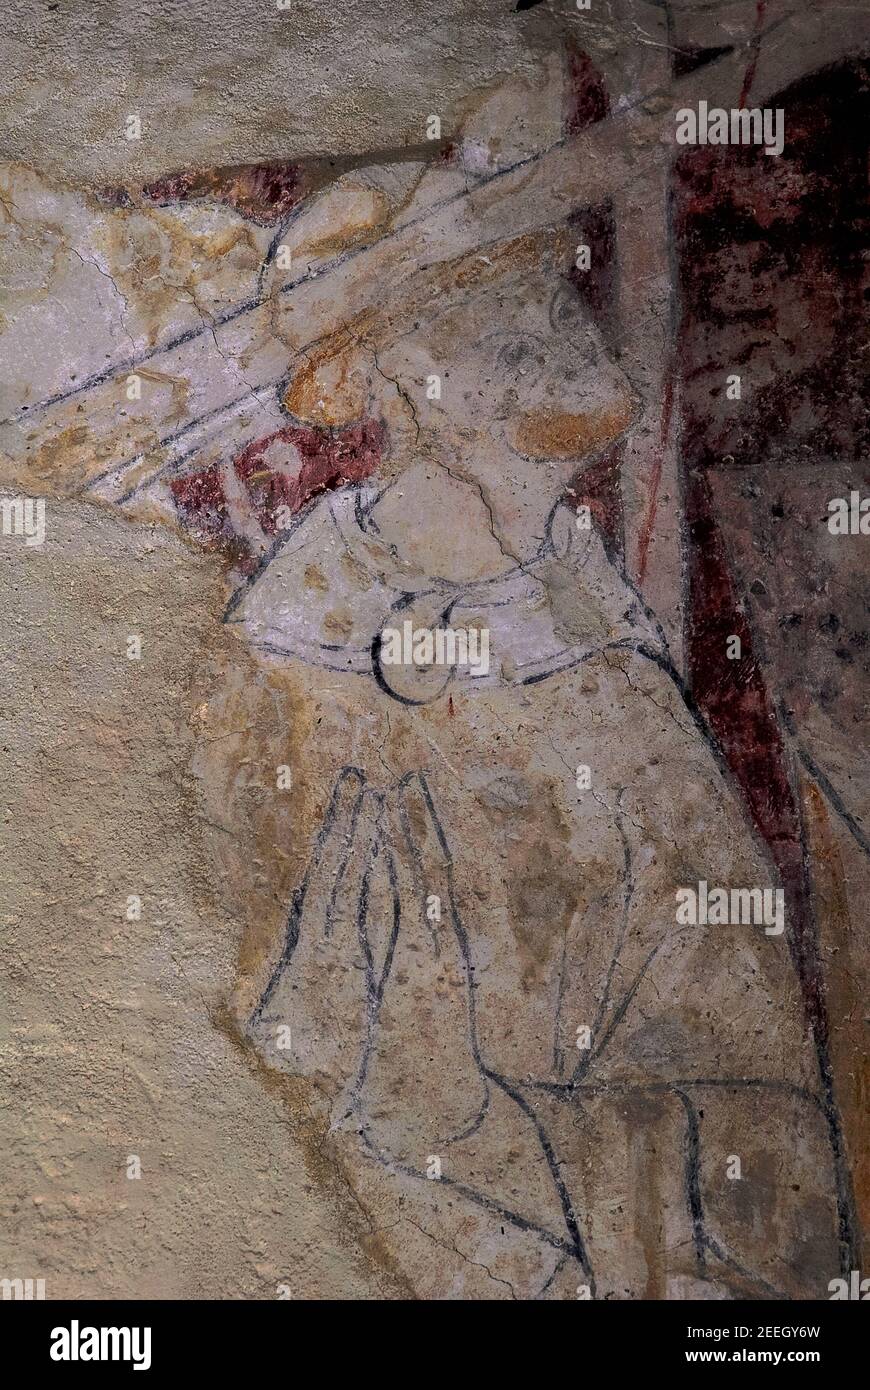 A broadsword slices into the skull of ‘turbulent priest’ Archbishop Thomas Becket as he kneels in prayer, about to be murdered, in Canterbury Cathedral on 29 December 1170.  Detail of late 1200s medieval wall painting in the Parish Church of Saint Augustine at Brookland, Kent, England.  Becket was killed by four knights, supporters of King Henry II, after arguing with the king over church rights and privileges.  Becket was canonised in 1173 and is venerated as a saint and Christian martyr by both Roman Catholics and Anglicans. Stock Photo